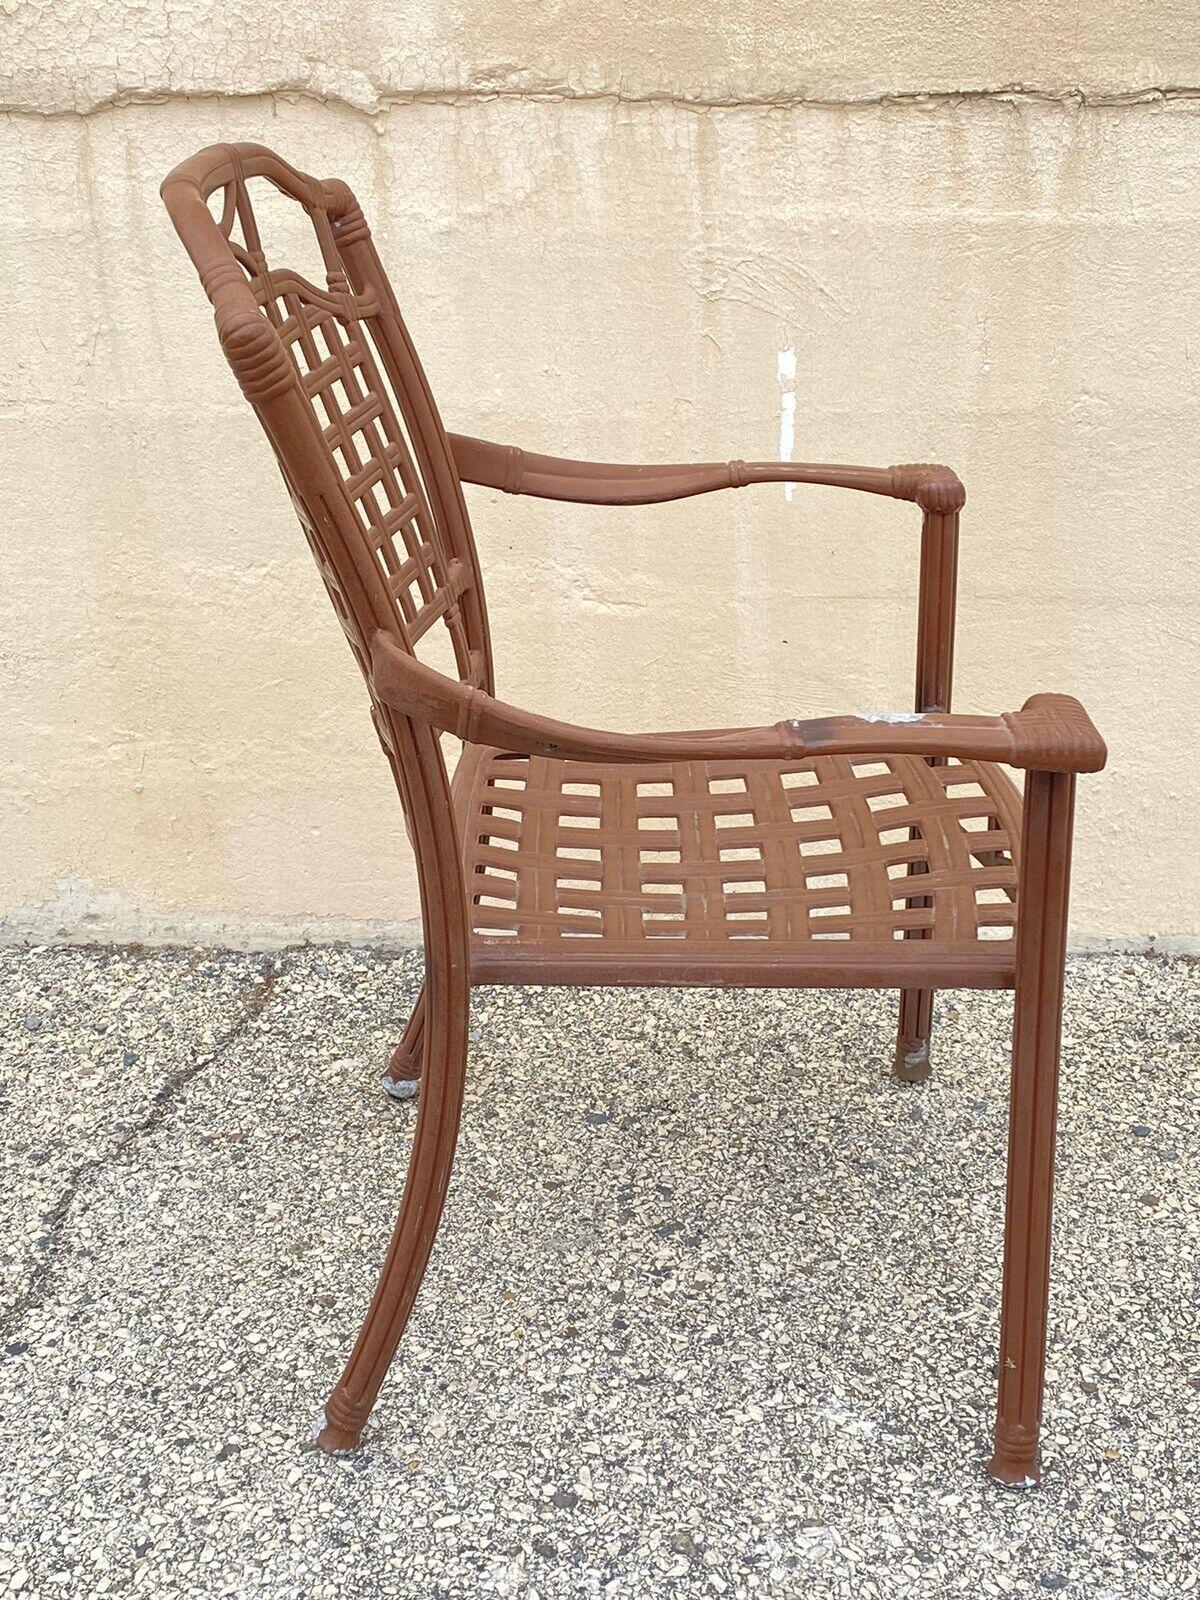 Cast Aluminum Basket Weave Lattice Rattan Patio Outdoor Pool Arm Chair In Good Condition For Sale In Philadelphia, PA